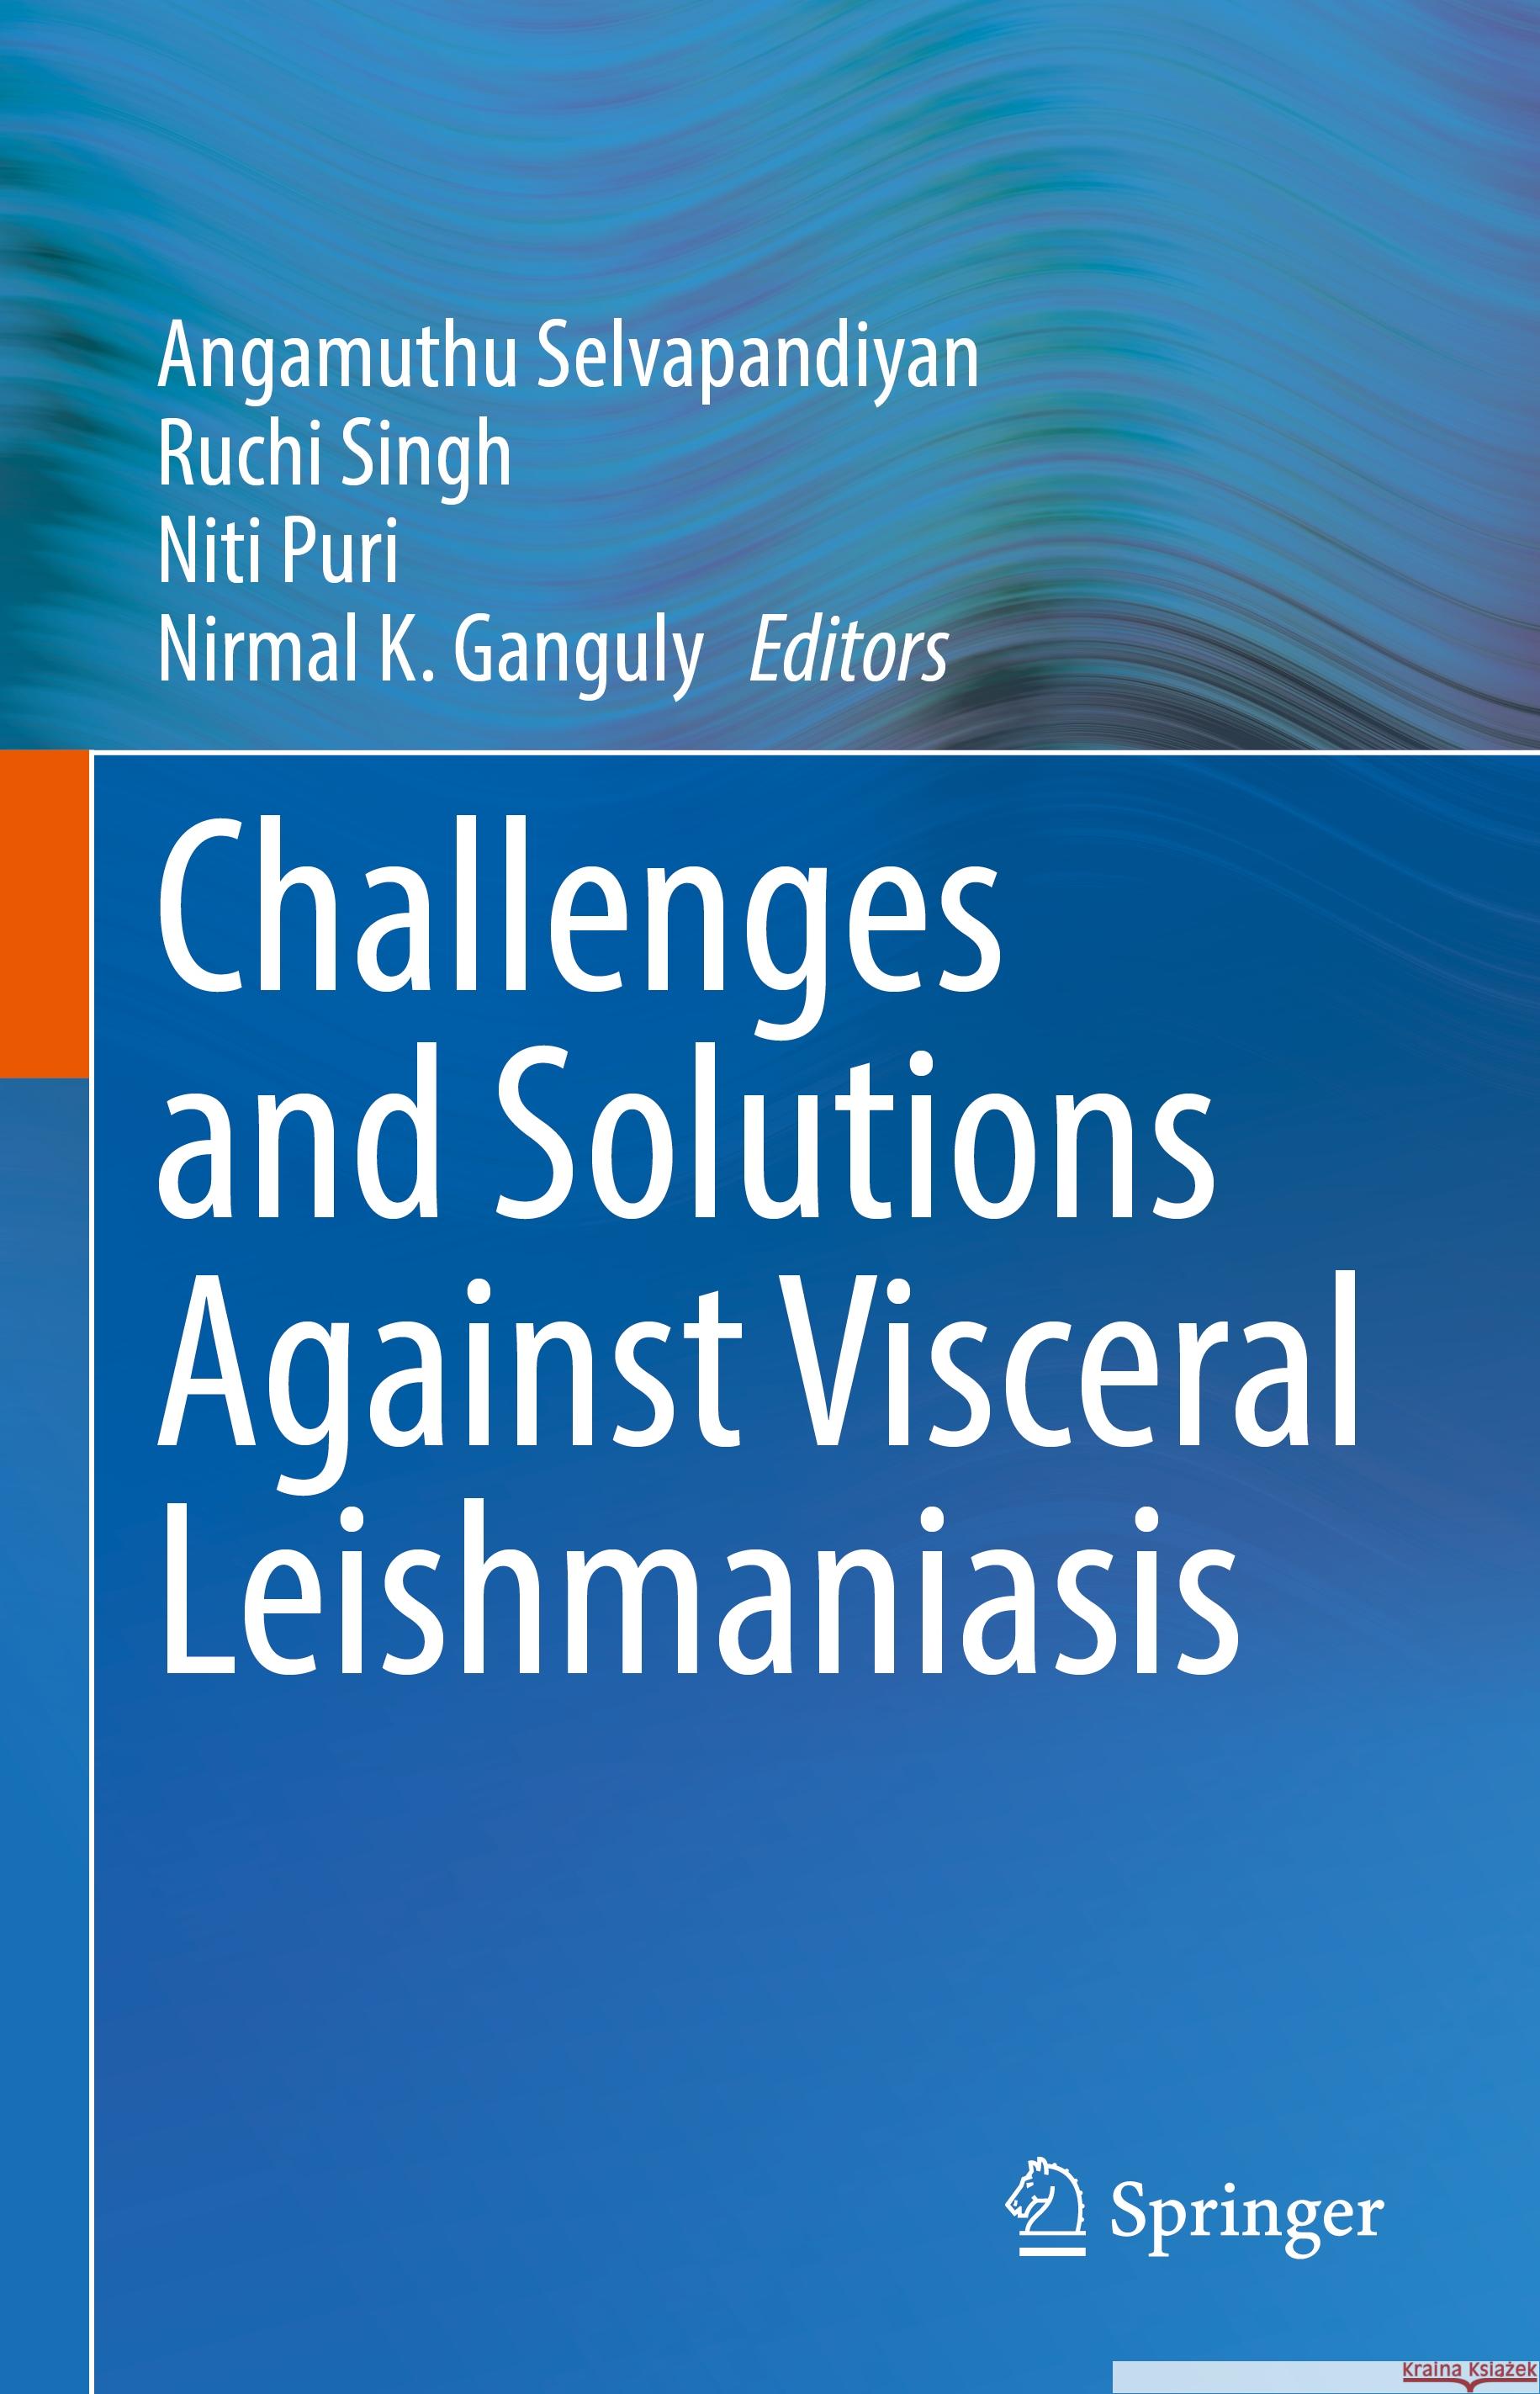 Challenges and Solutions Against Visceral Leishmaniasis Angamuthu Selvapandiyan Ruchi Singh Niti Puri 9789819969982 Springer